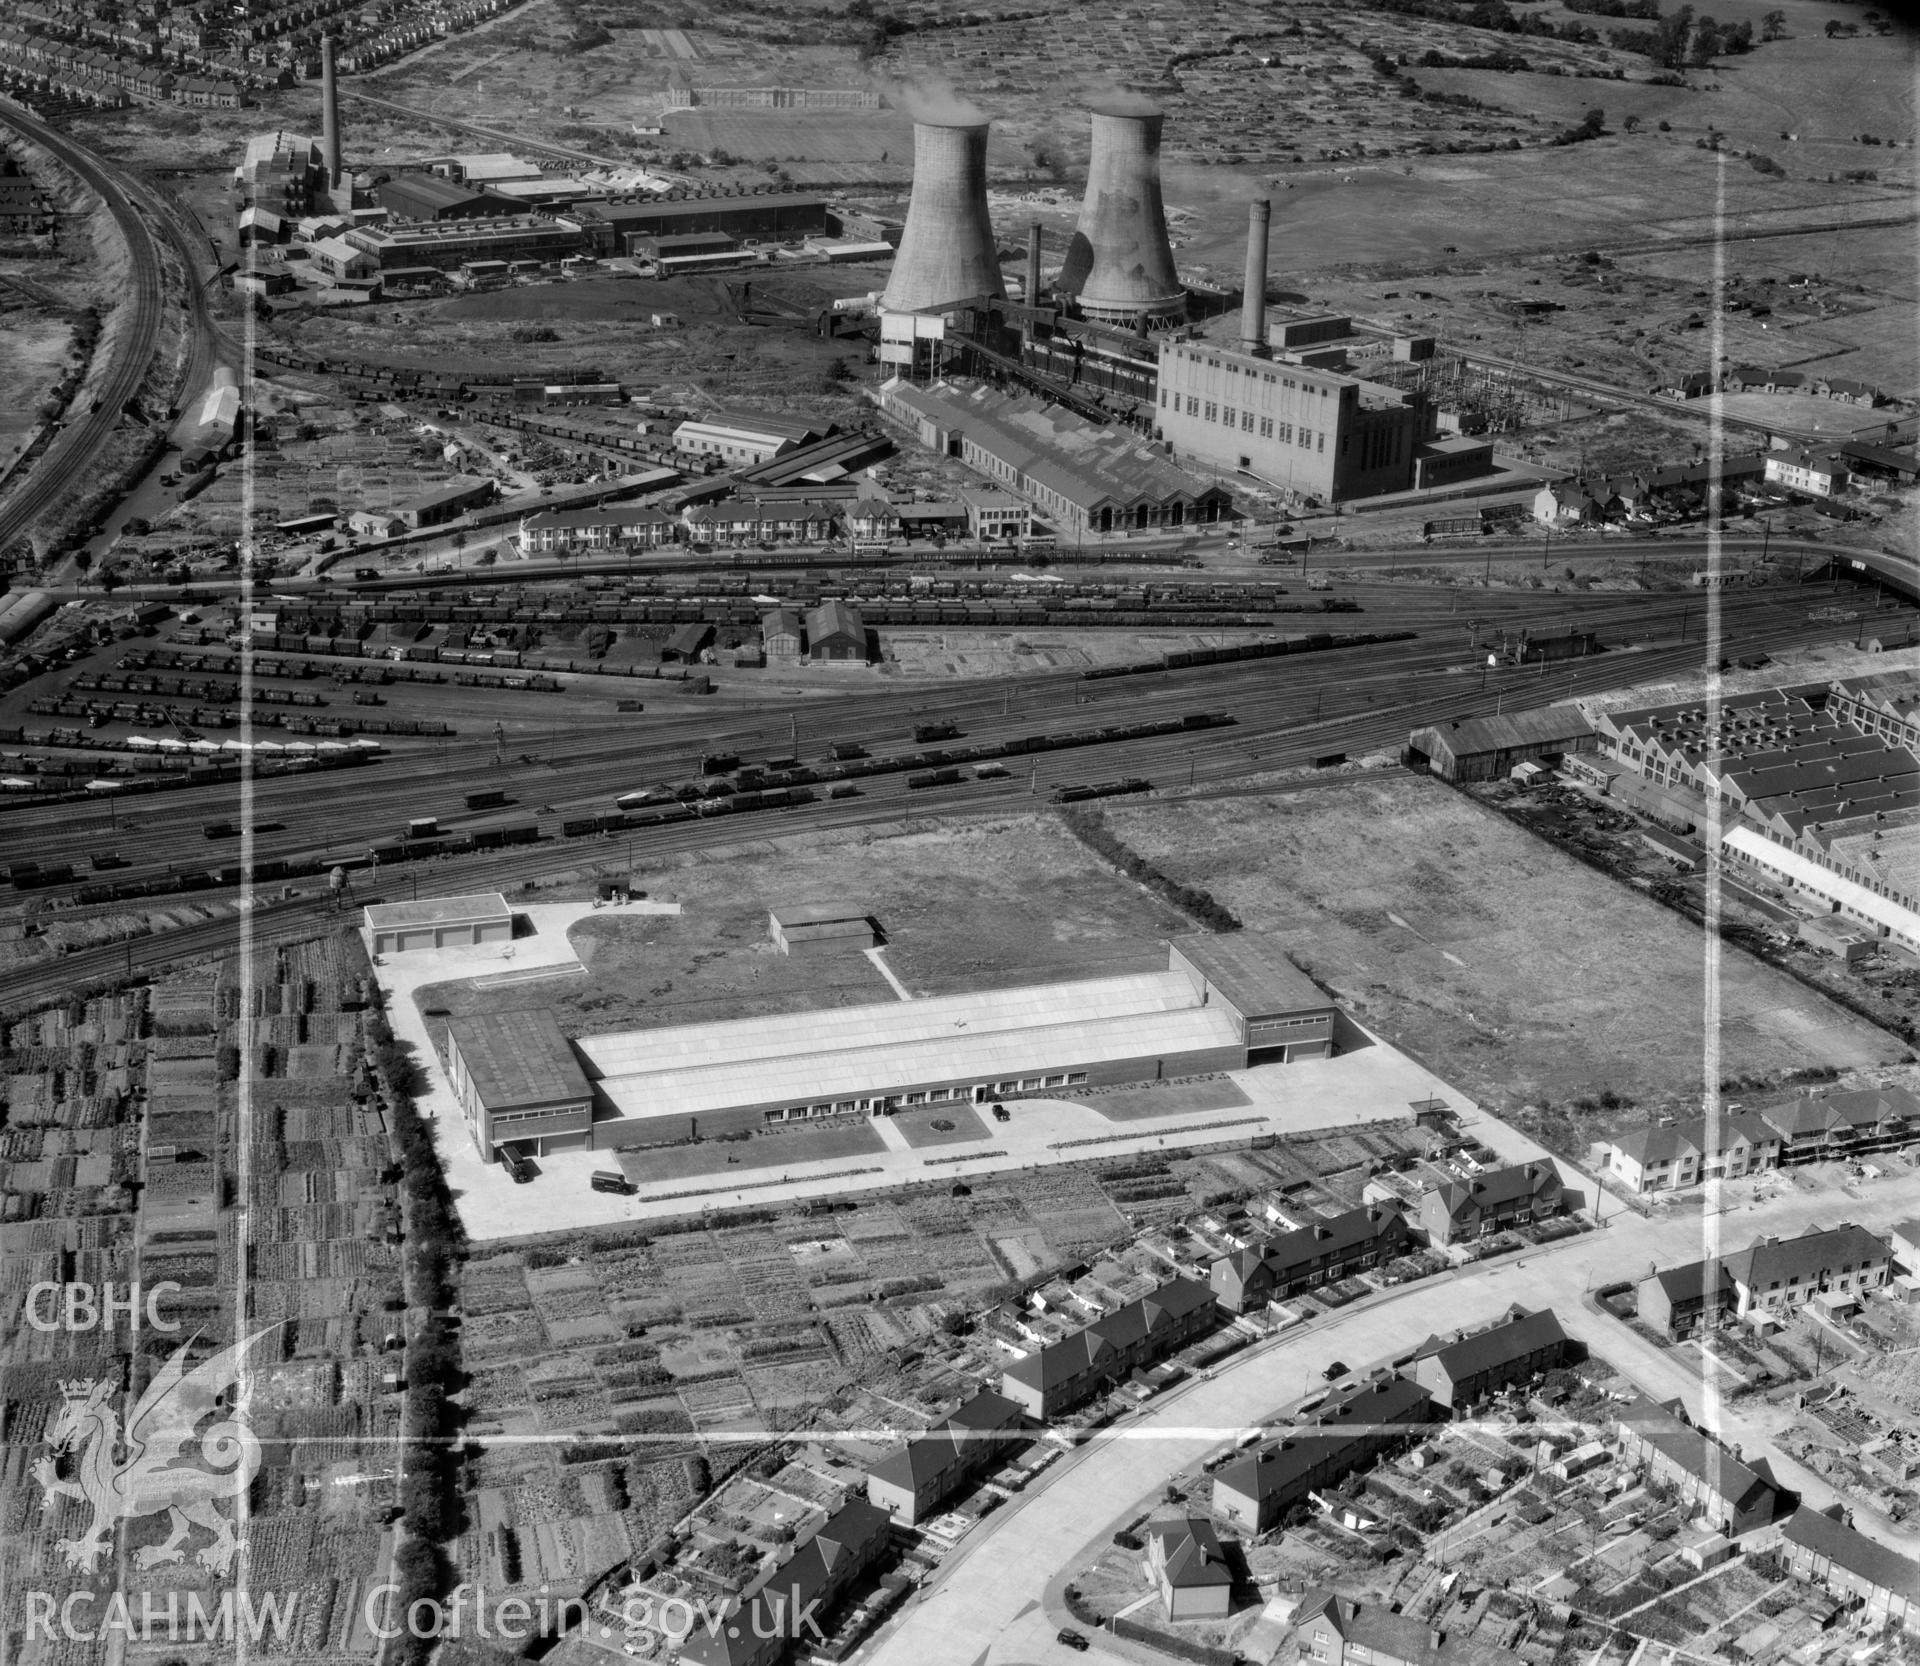 View of F.E. Fox biscuit factory, Cardiff, showing power station in background